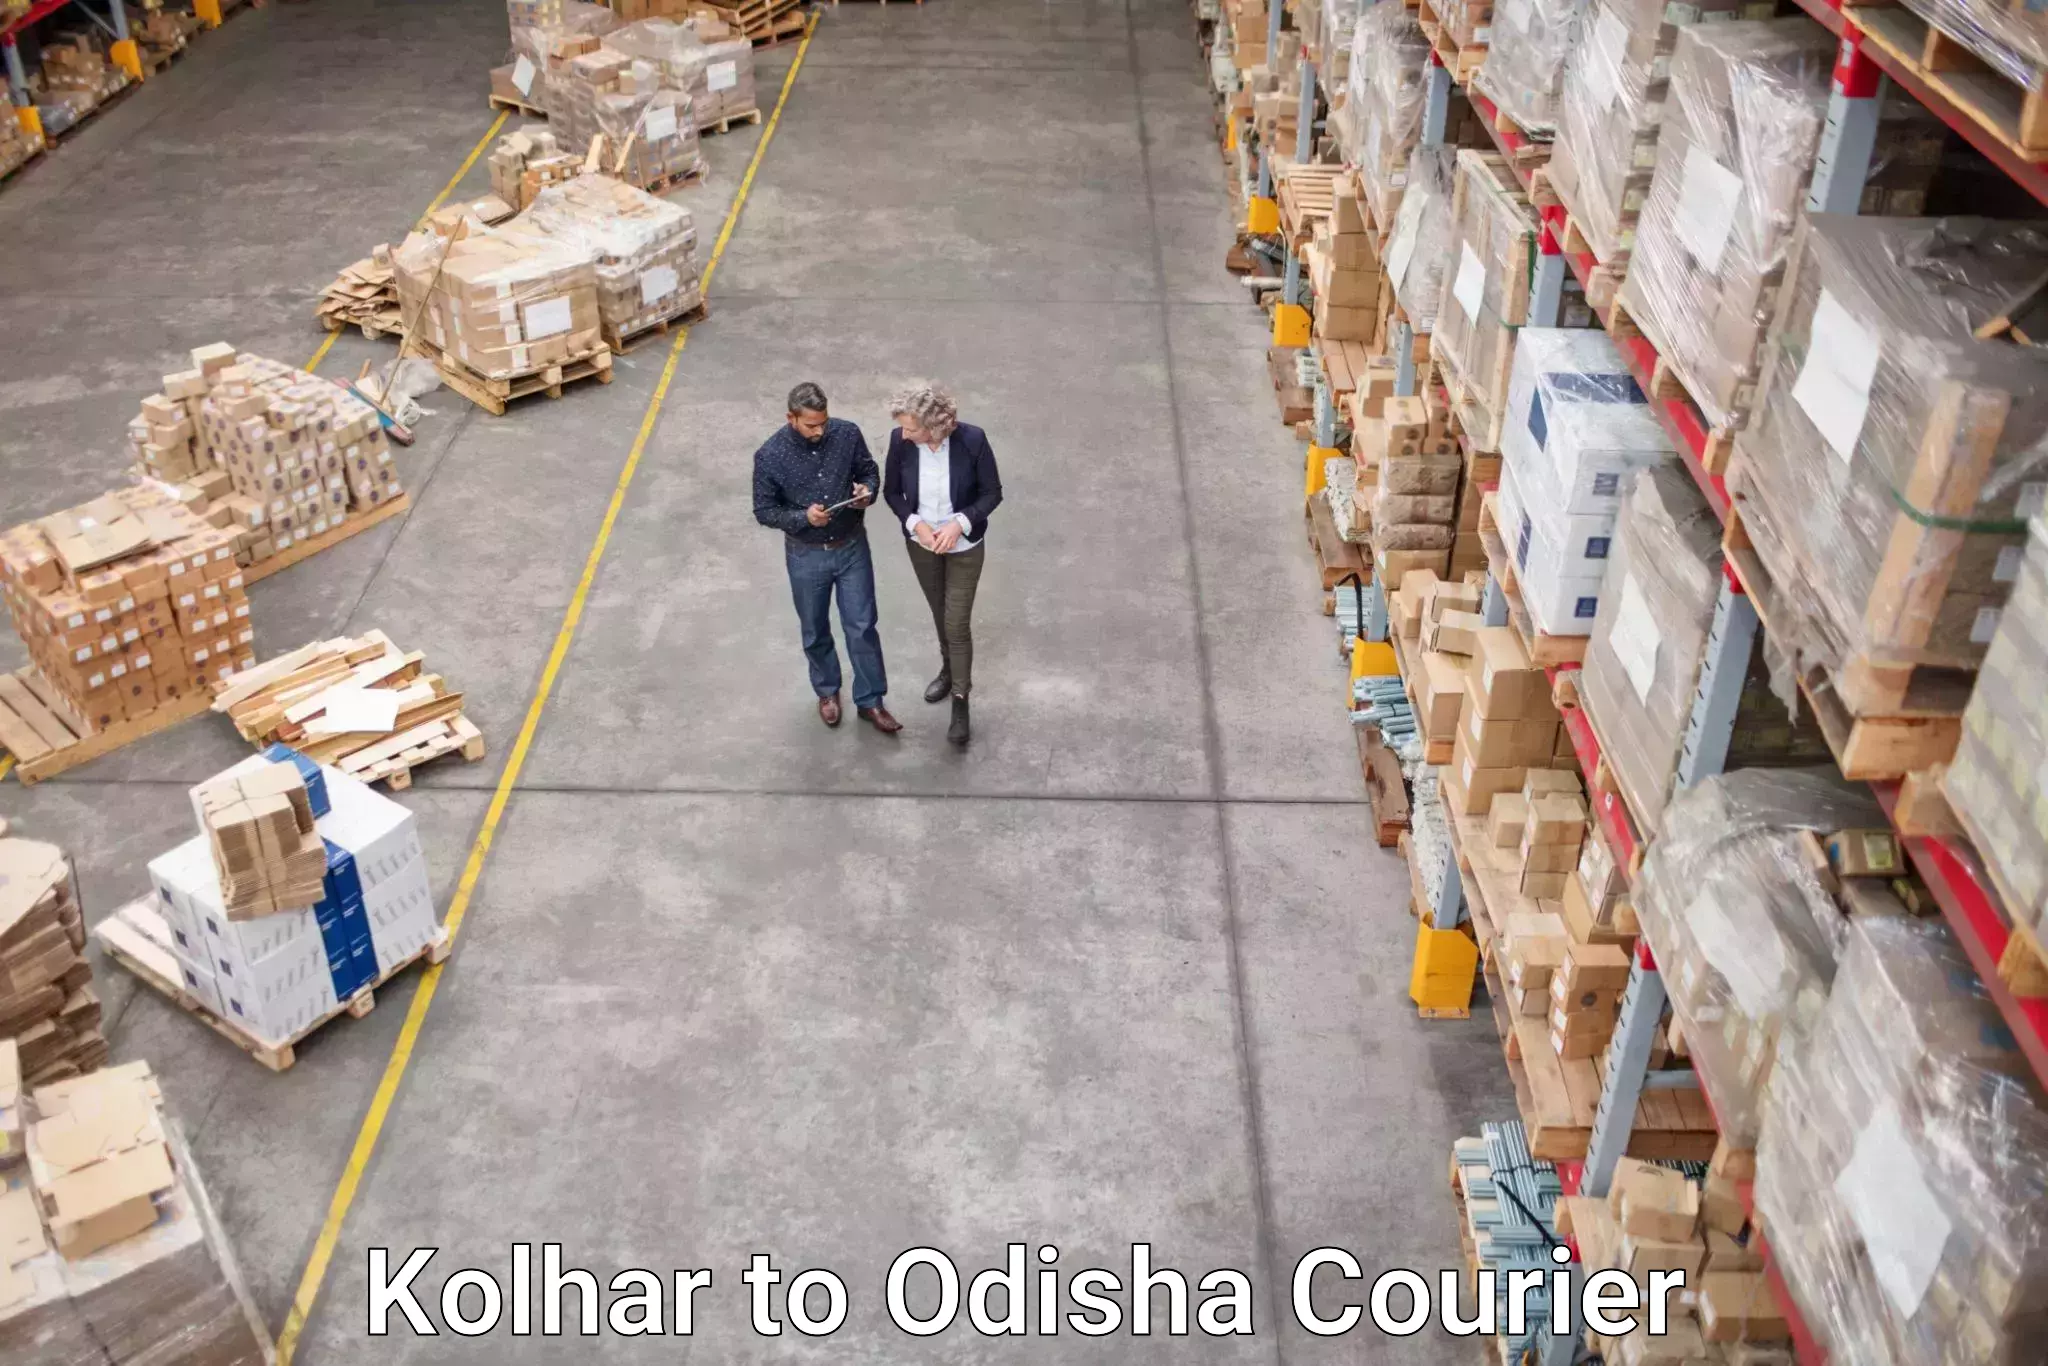 State-of-the-art courier technology Kolhar to Rairangpur